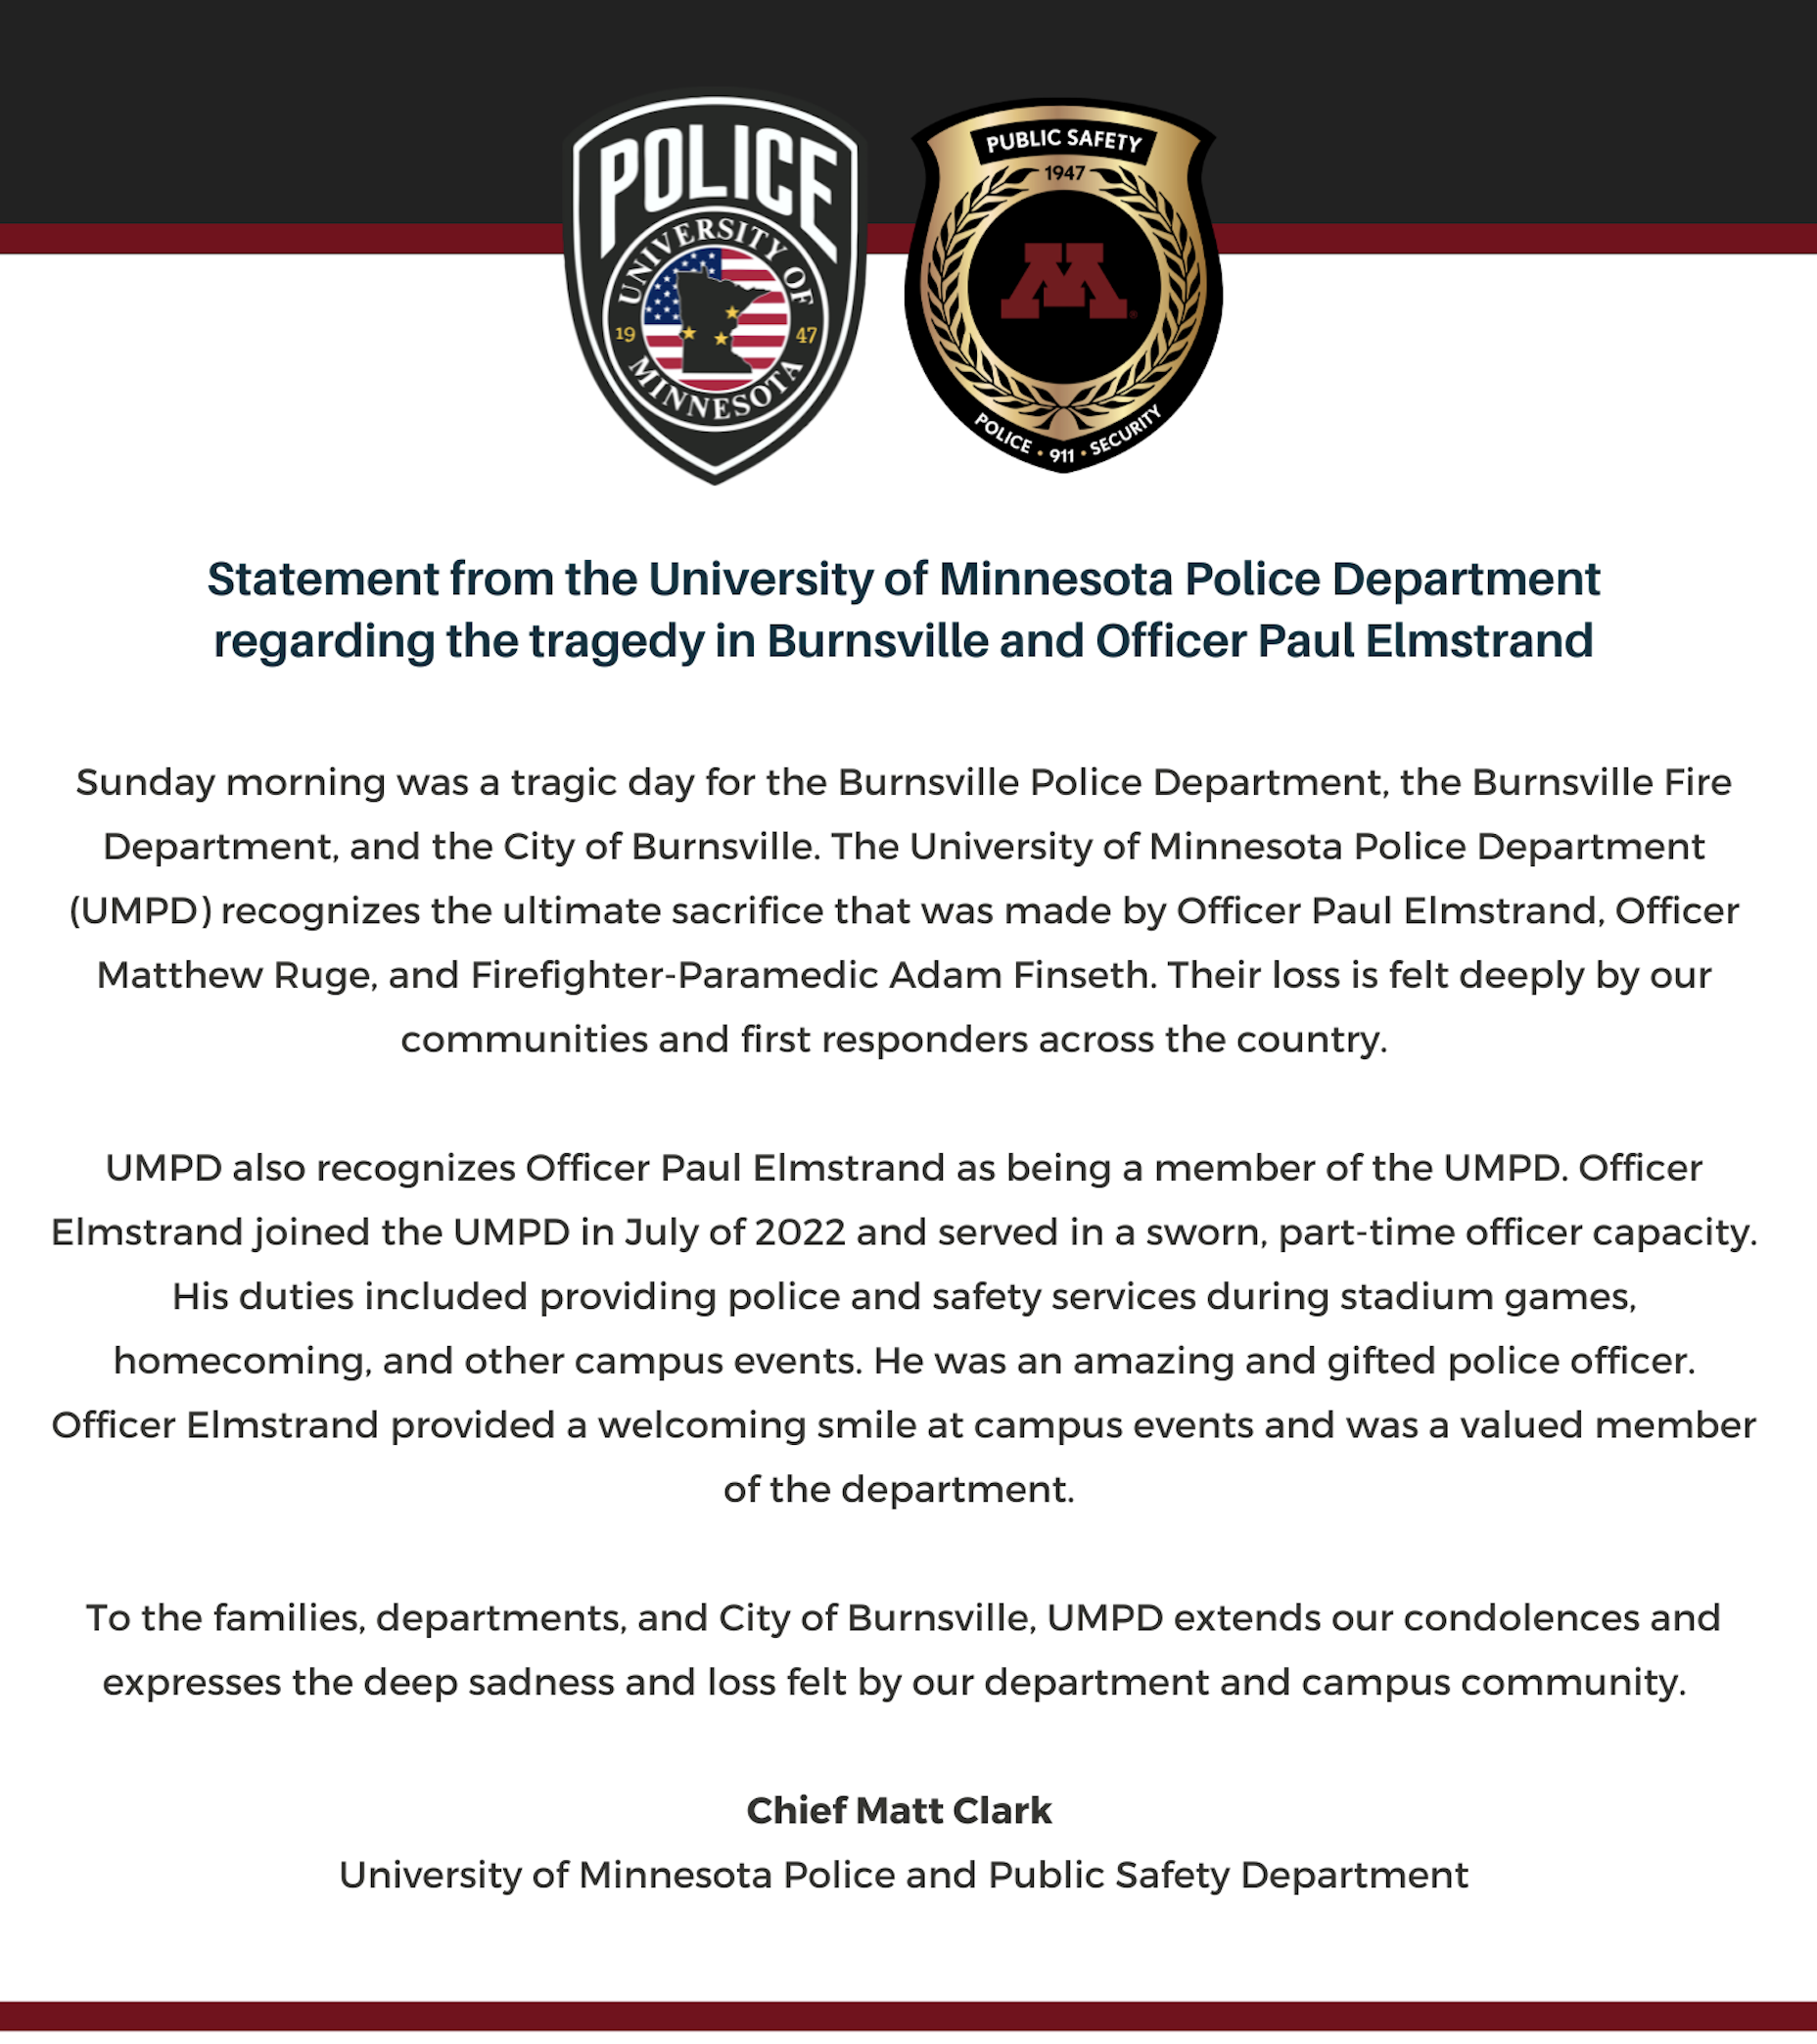 Statement form the University of Minnesota Police Department regarding the tragedy in Burnsville and Officer Paul Elmstrand